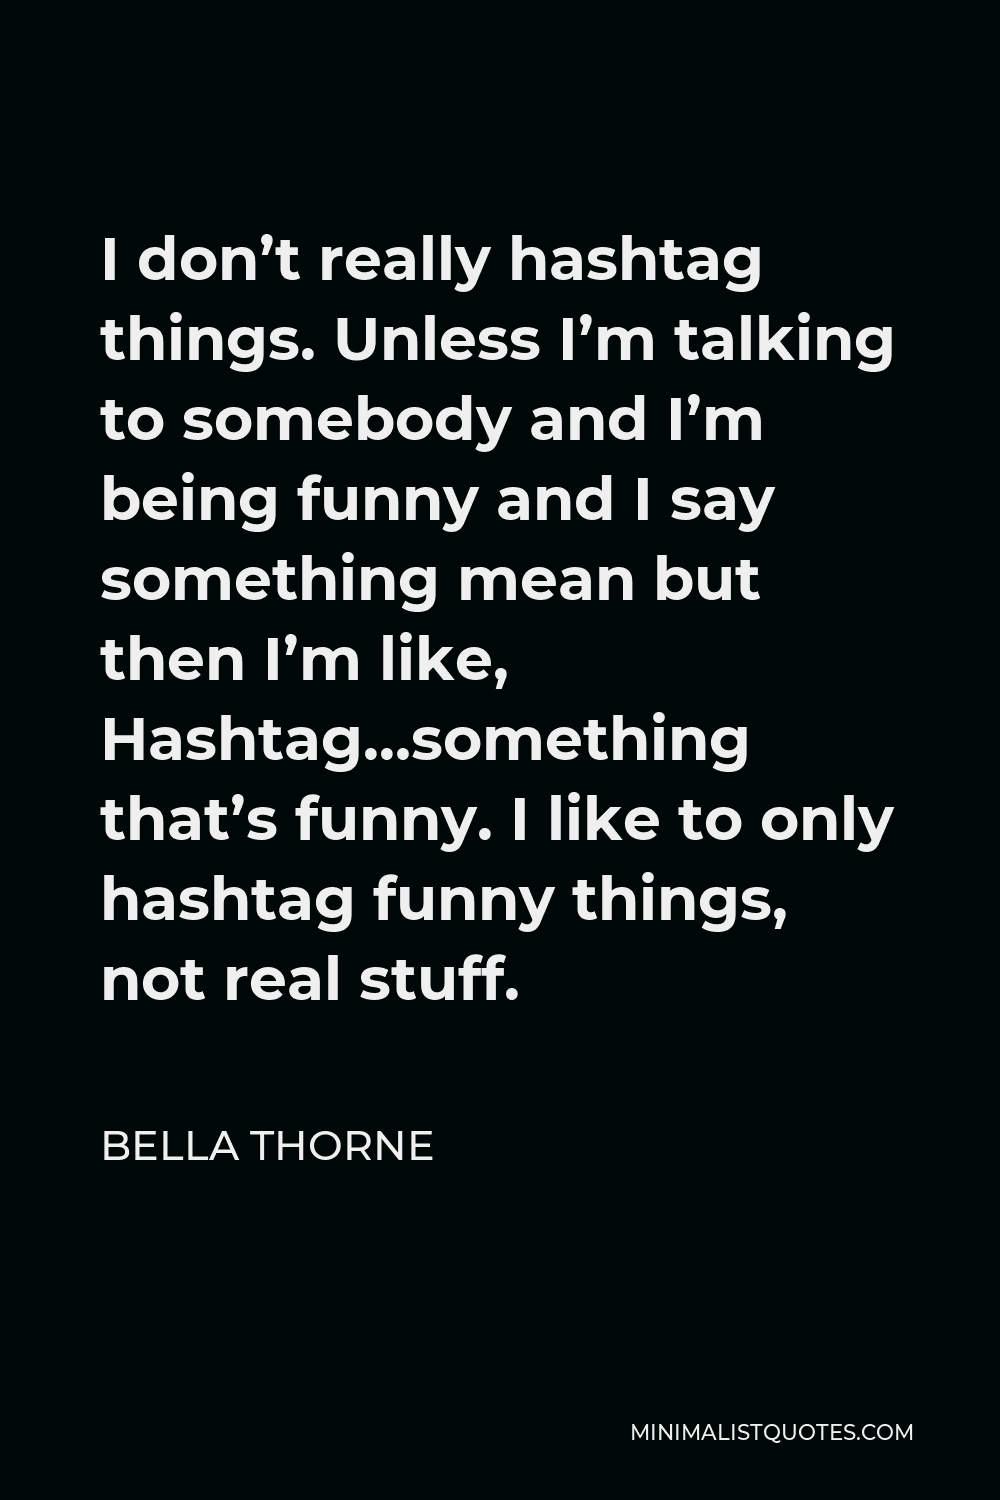 Bella Thorne Quote - I don’t really hashtag things. Unless I’m talking to somebody and I’m being funny and I say something mean but then I’m like, Hashtag…something that’s funny. I like to only hashtag funny things, not real stuff.